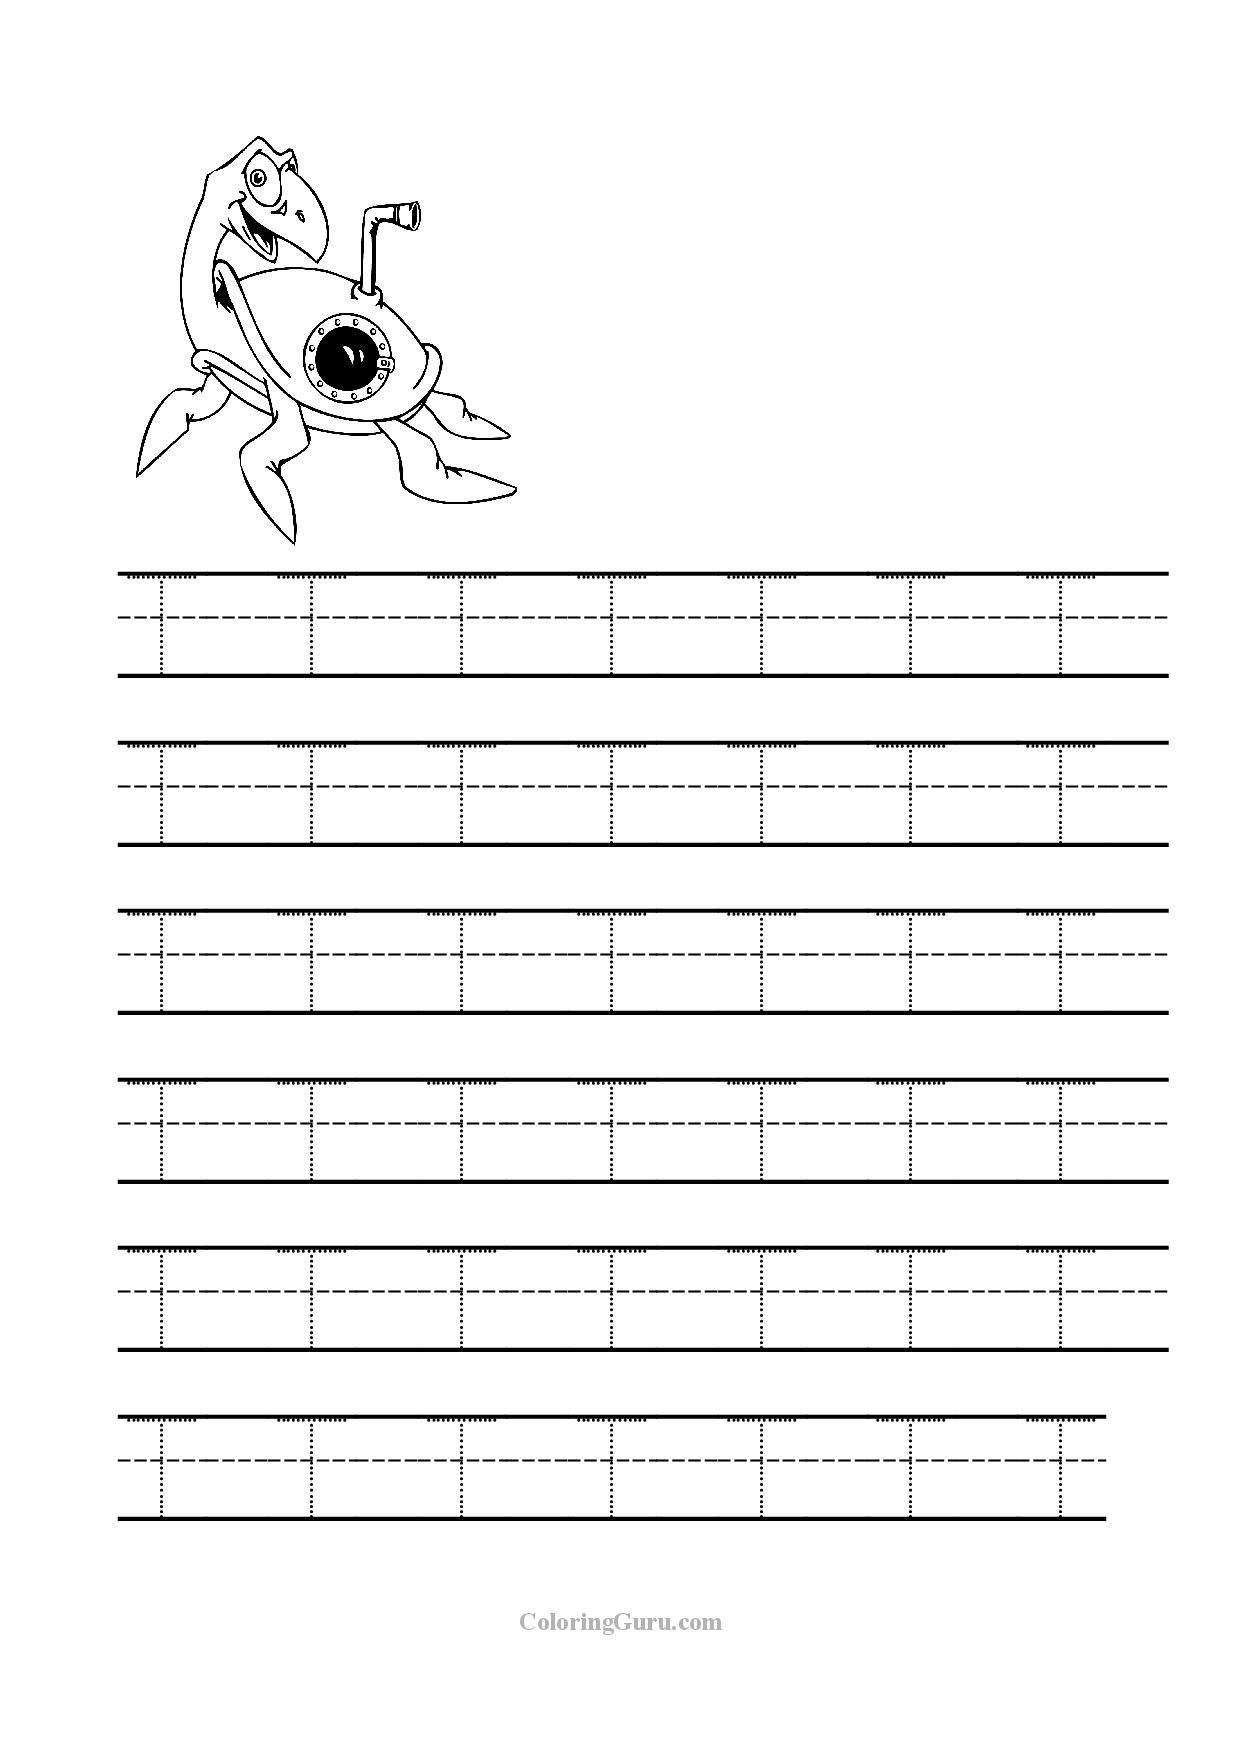 Coloring Book : Coloring Book Tracing Letter Worksheets in Tracing Letter I Worksheets Free